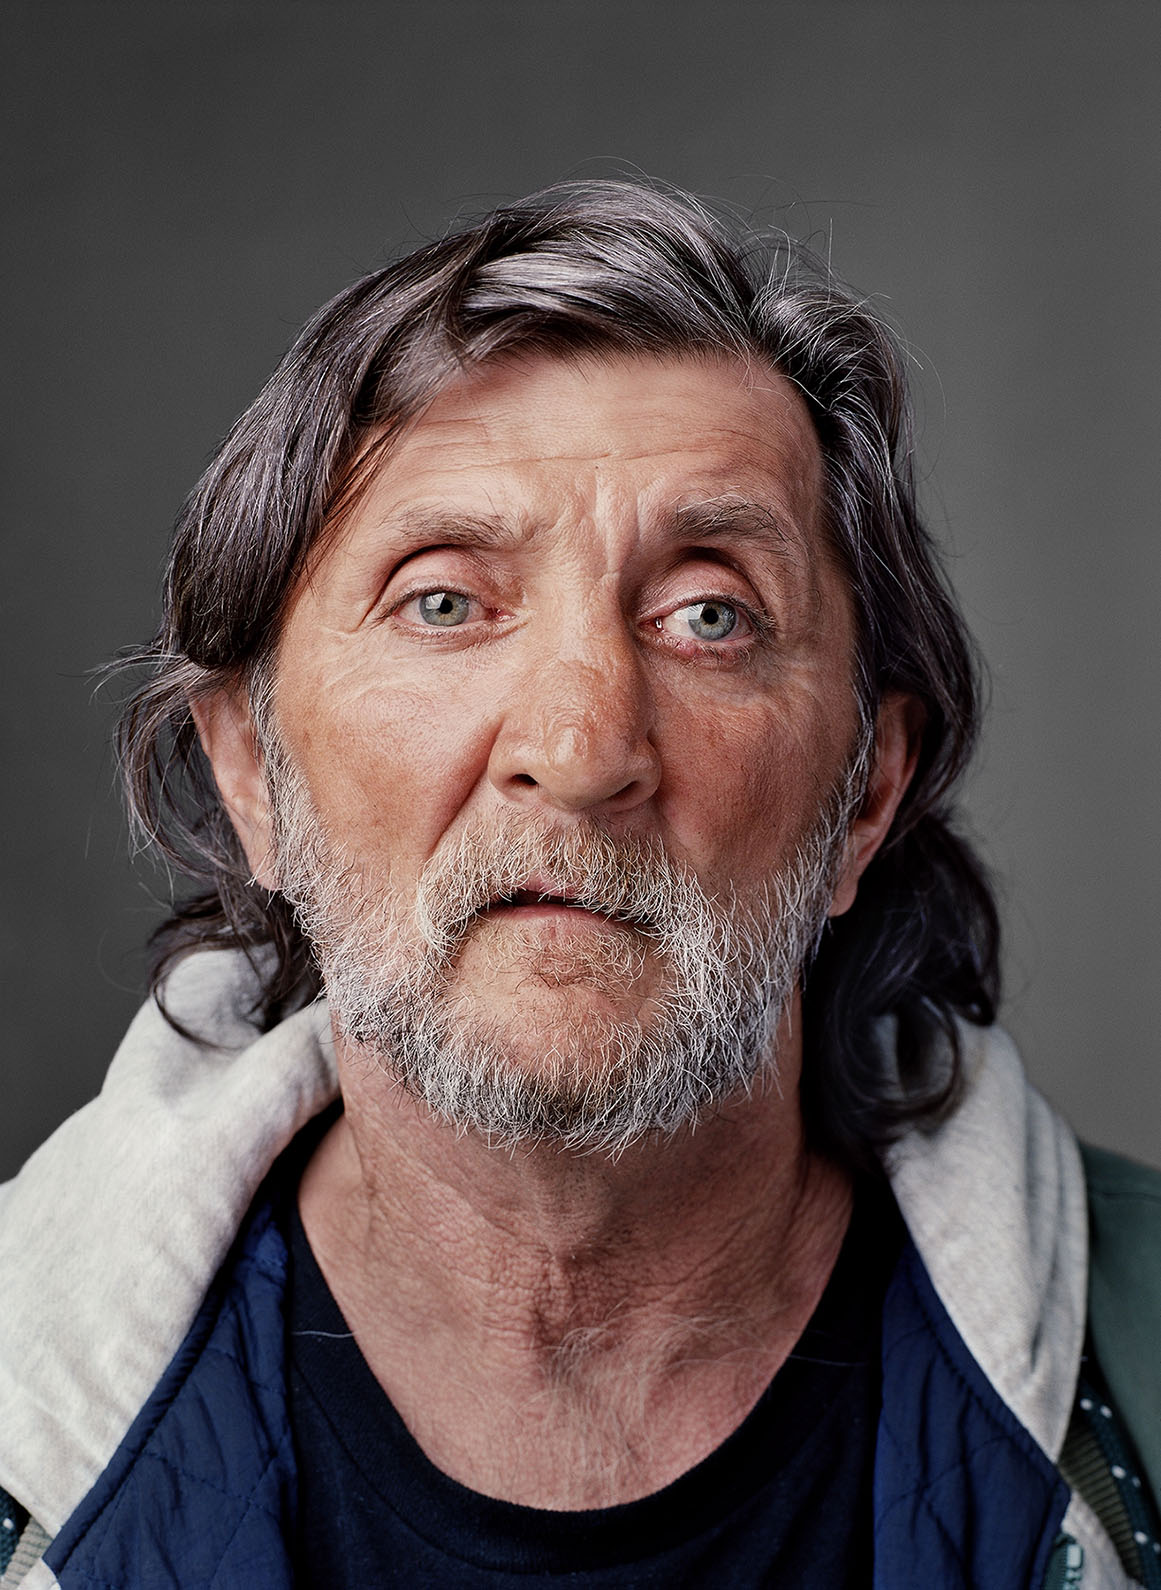 USA. "Down and Out in the South": Studio portraits of homeless people in Atlanta (GA), Columbia (SC) and the Mississippi Delta.  Mo (b. "The Yukon", AK, 1951), photographed in Atlanta, GA, April 2011.